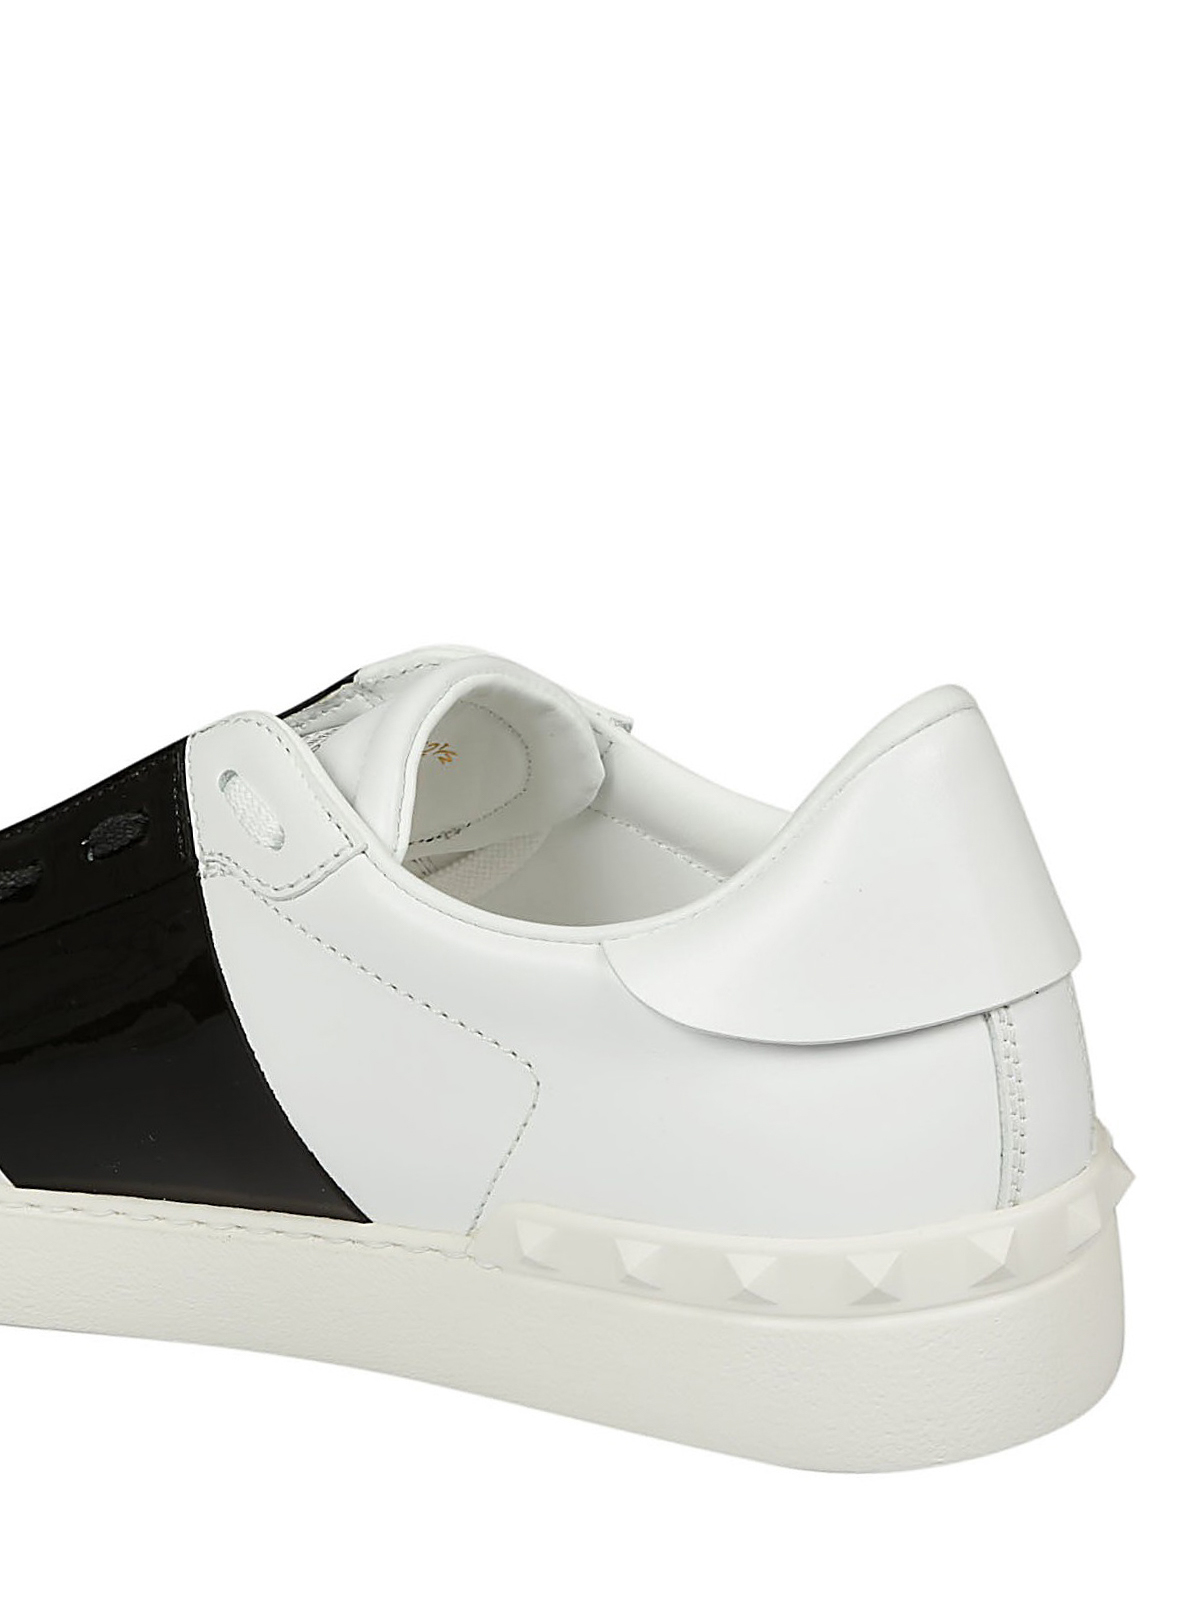 valentino white and black sneakers